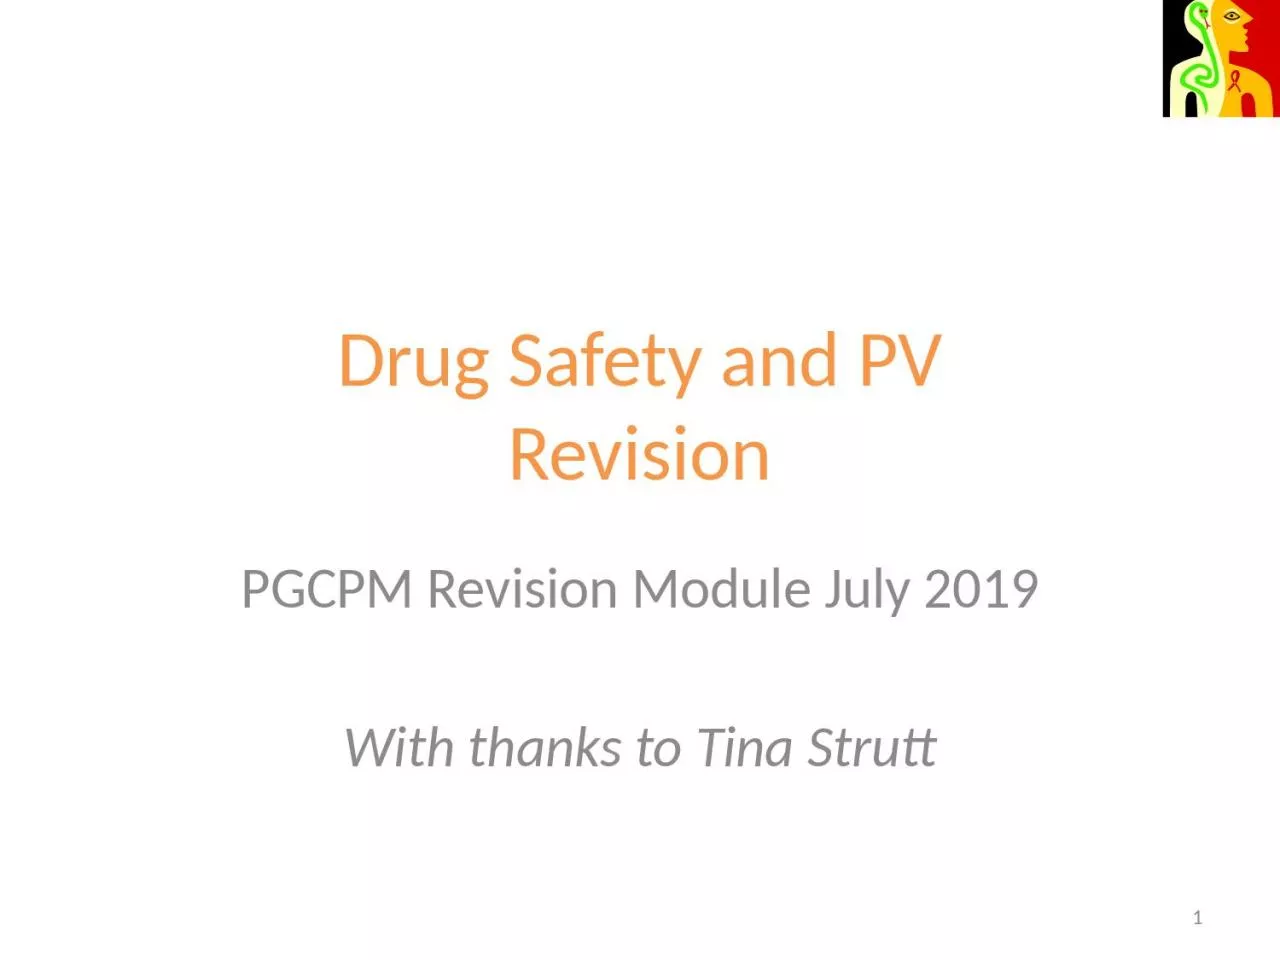 Drug Safety and PV Revision